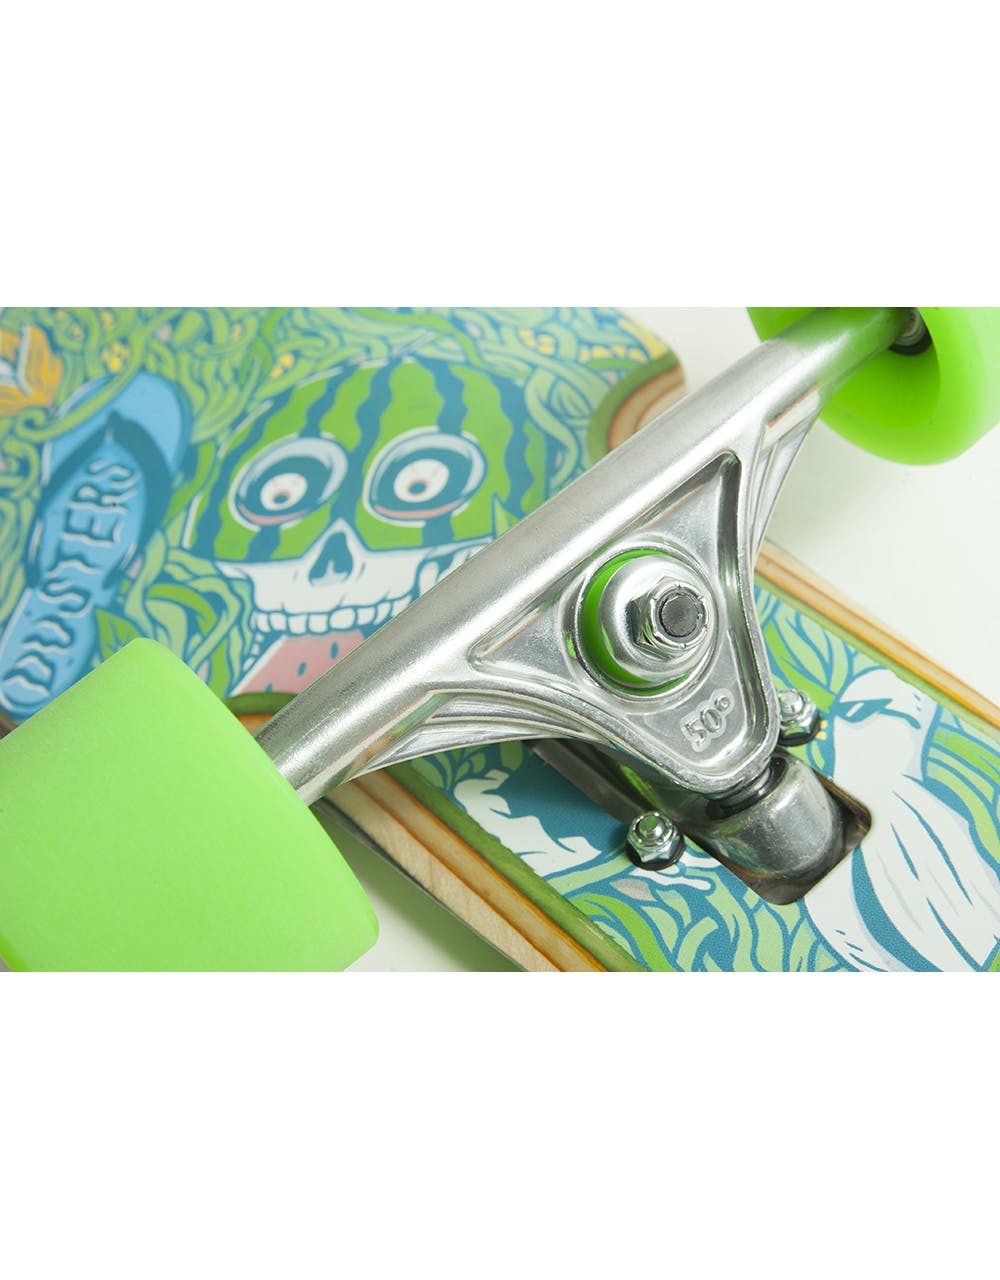 Dusters Playground Longboard - 38" x 9.125"